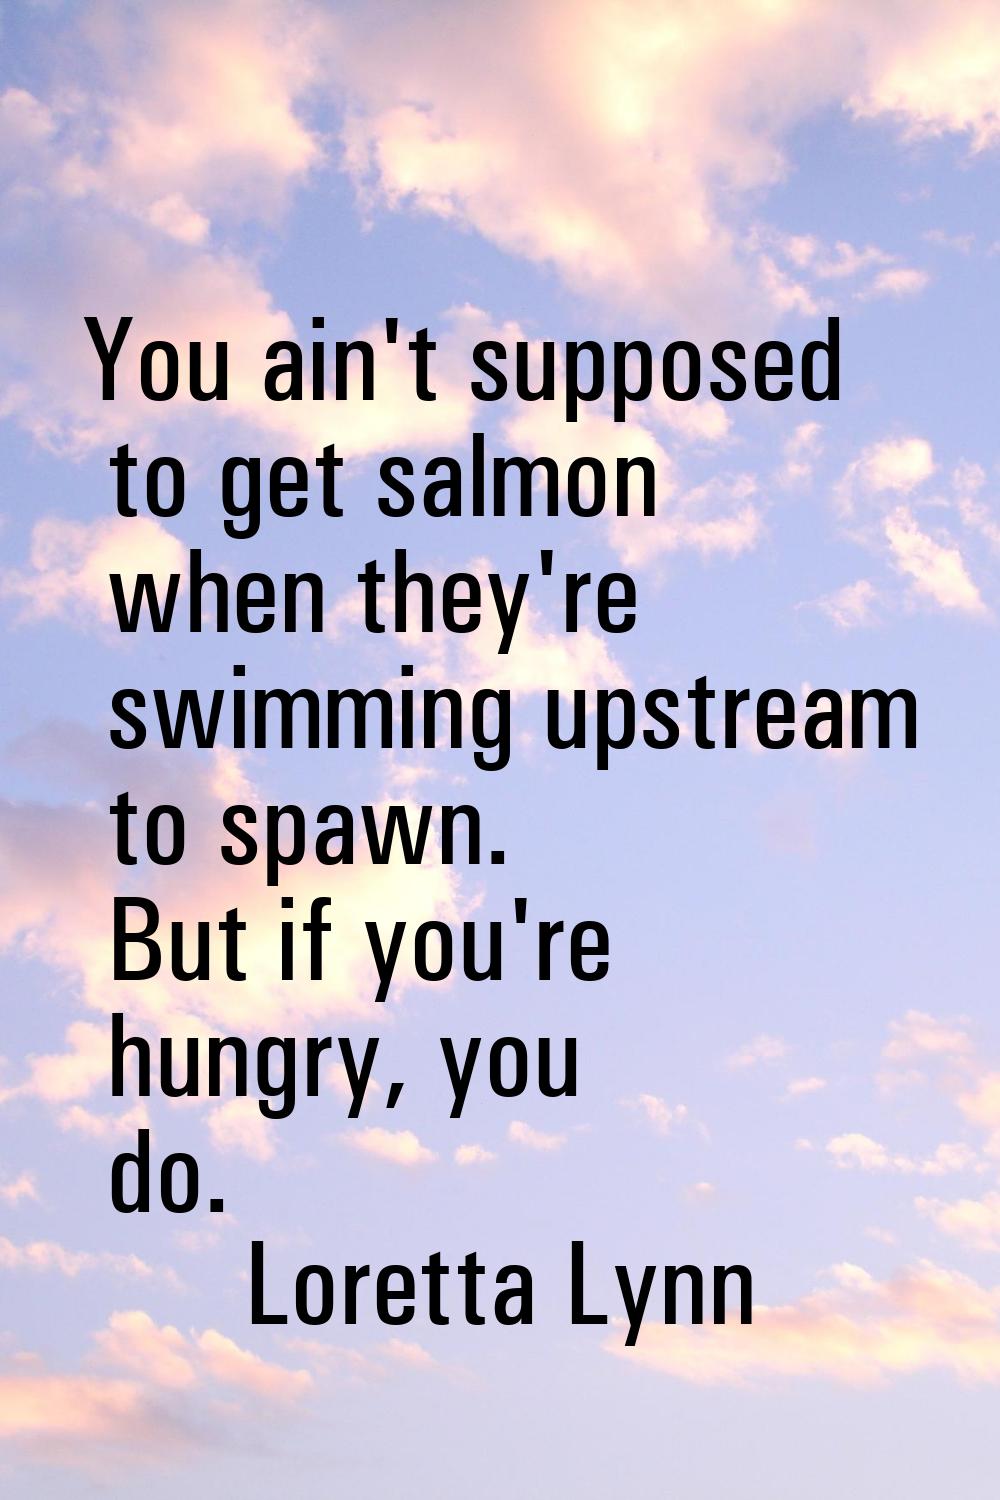 You ain't supposed to get salmon when they're swimming upstream to spawn. But if you're hungry, you